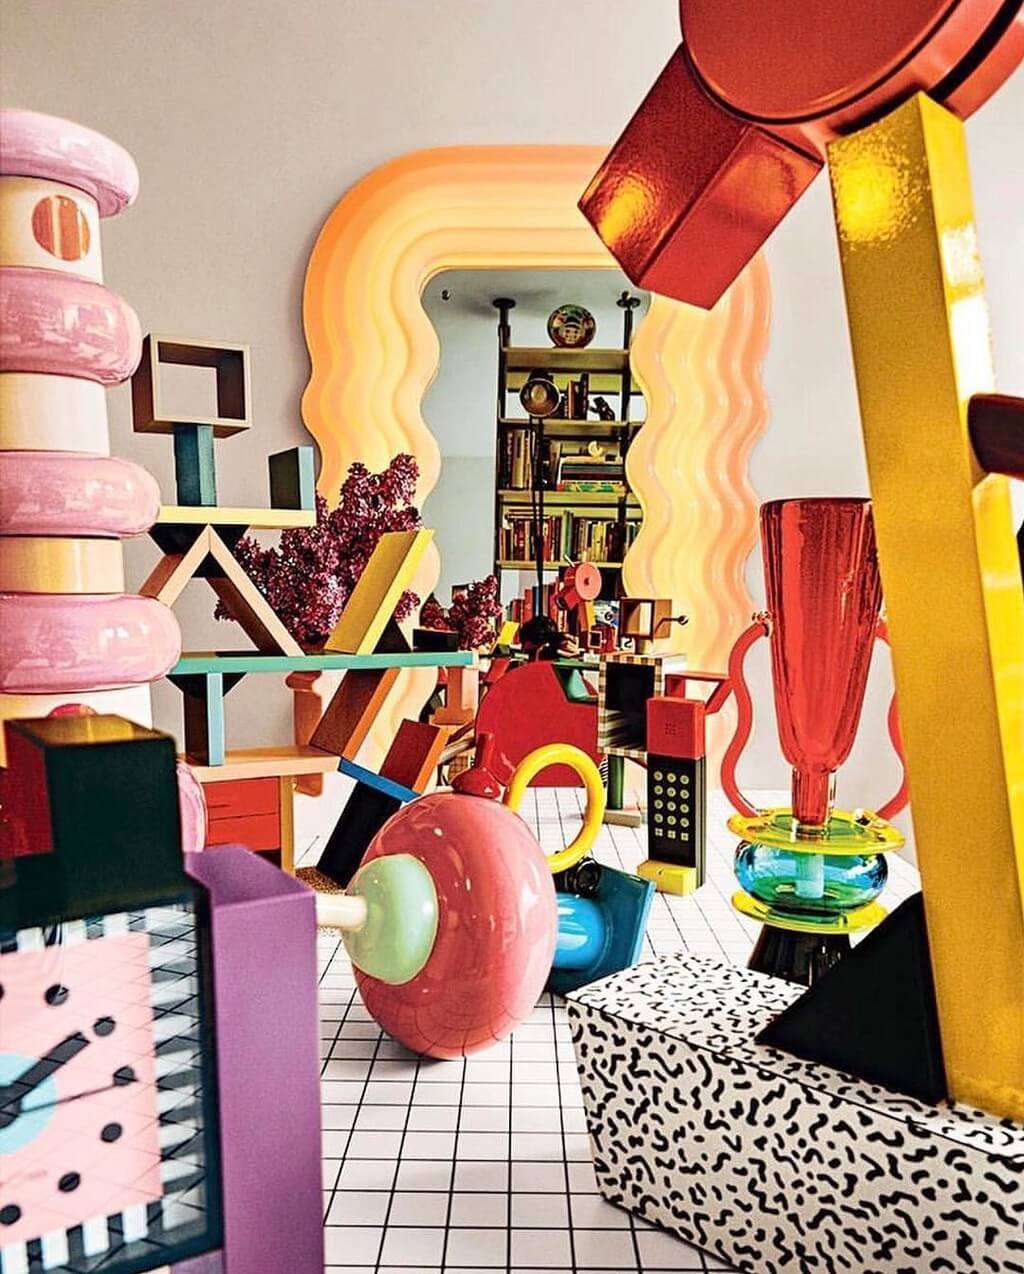 Memphis Design Style with furniture designed by Ettore Sottsass, including Ettore Sottsass's Utrafragola mirror